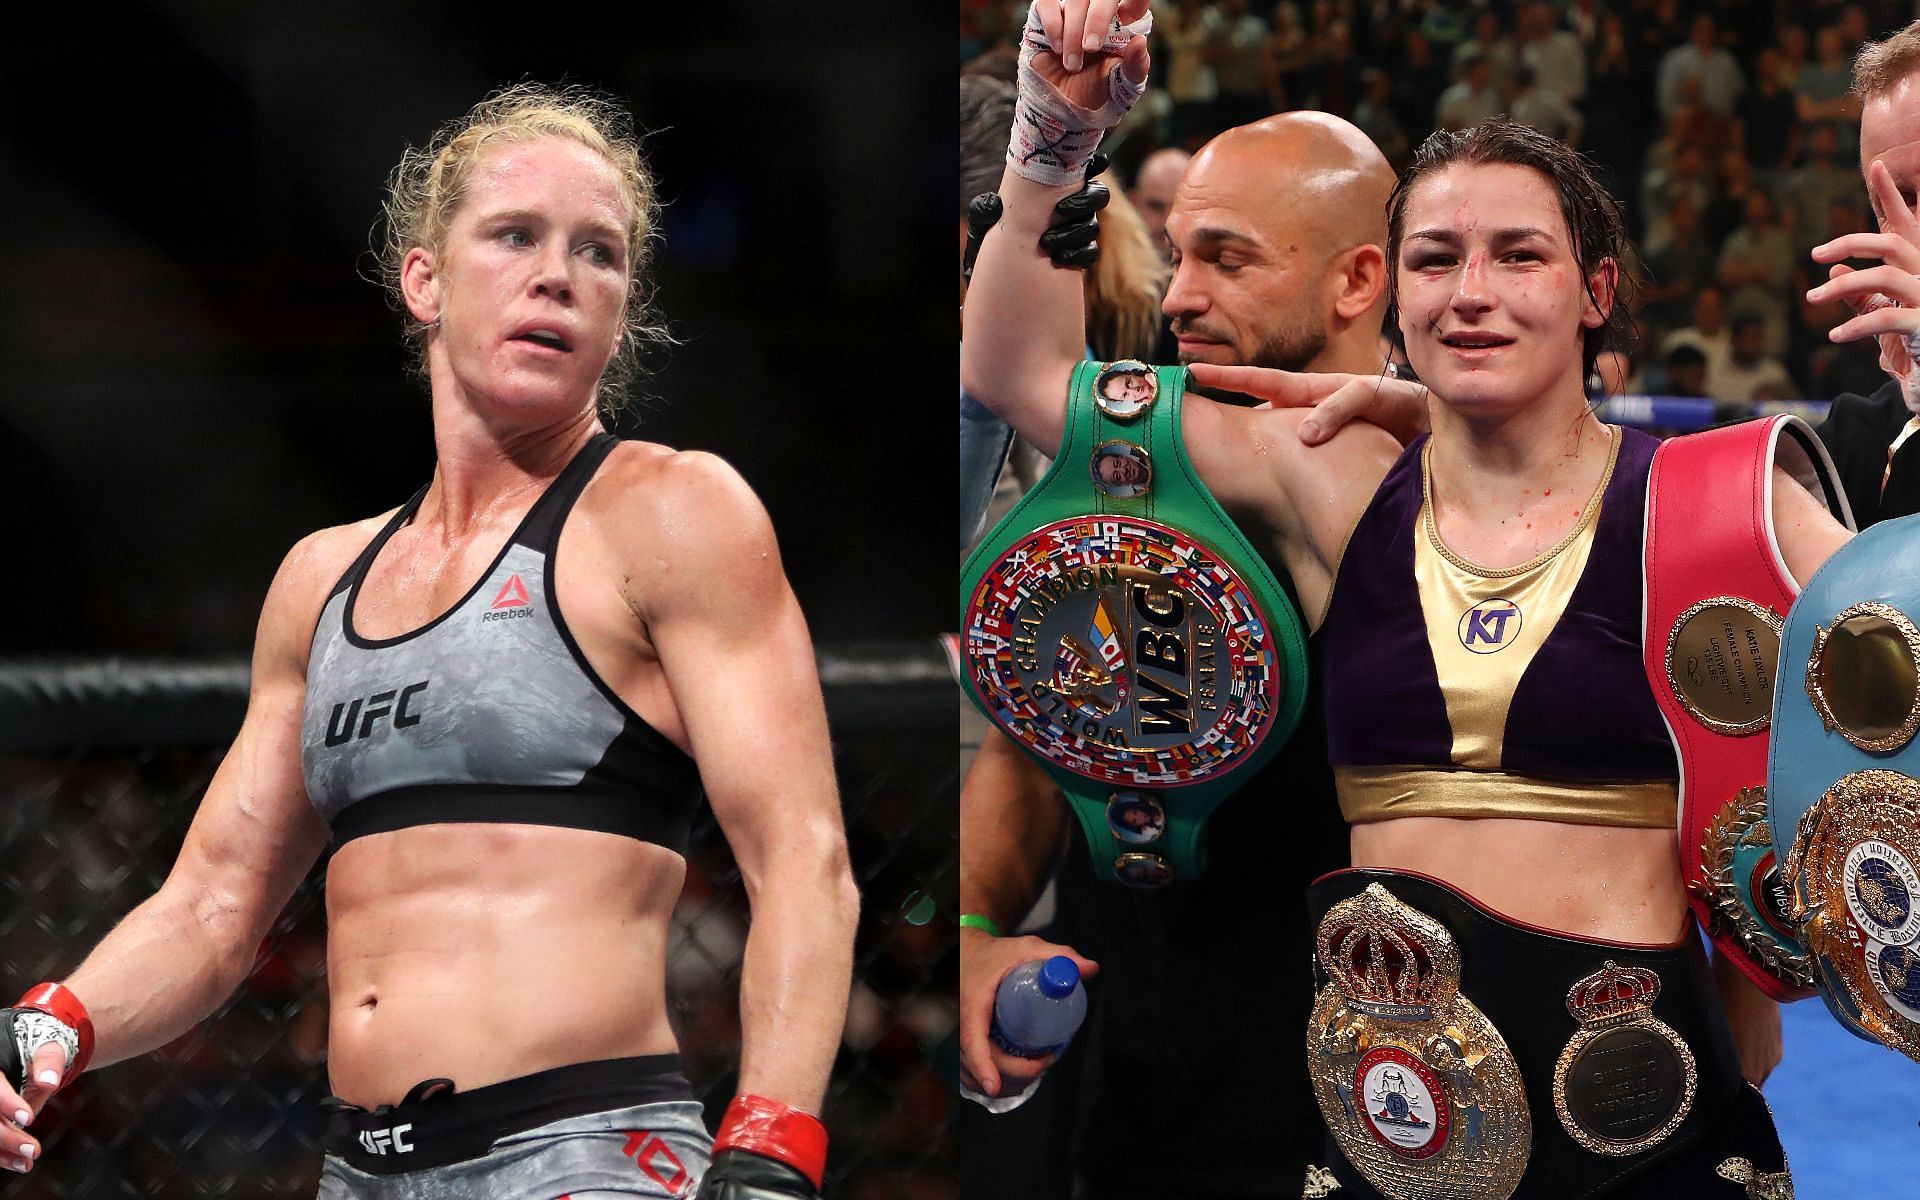 Holly Holm (left) and Katie Taylor (right) (Images via Getty)